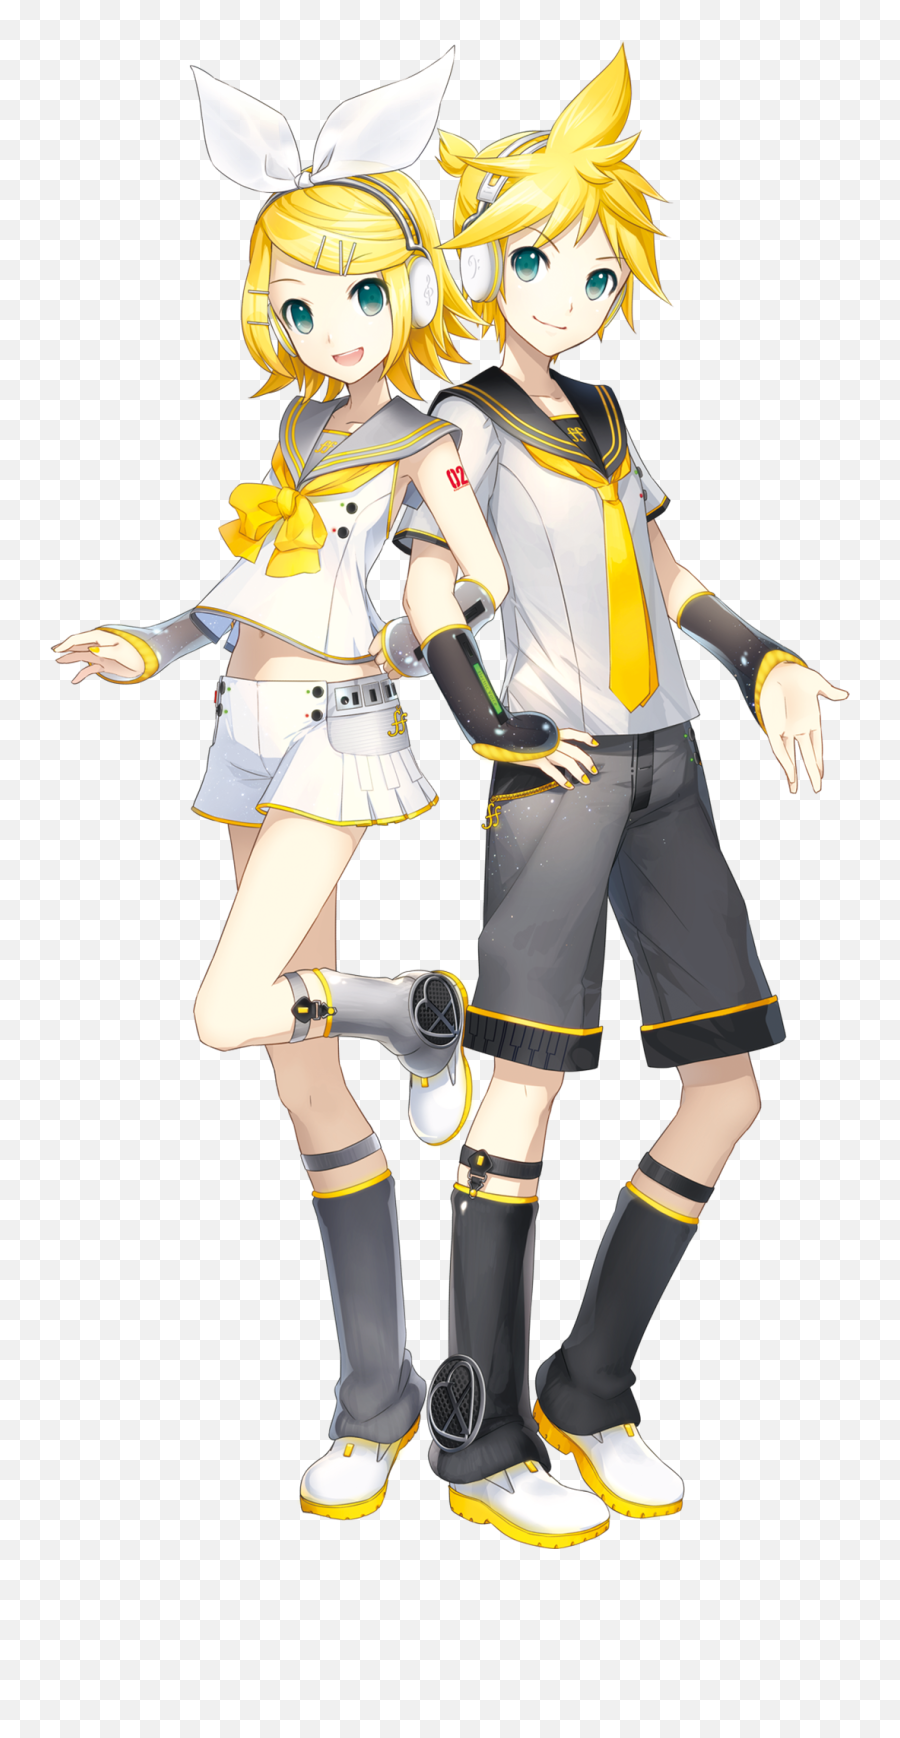 Custom Len Cosplay Costume V4x From Vocaloid - Cosplayfucom Vocaloid Rin E Len Png,Vocaloid Logo